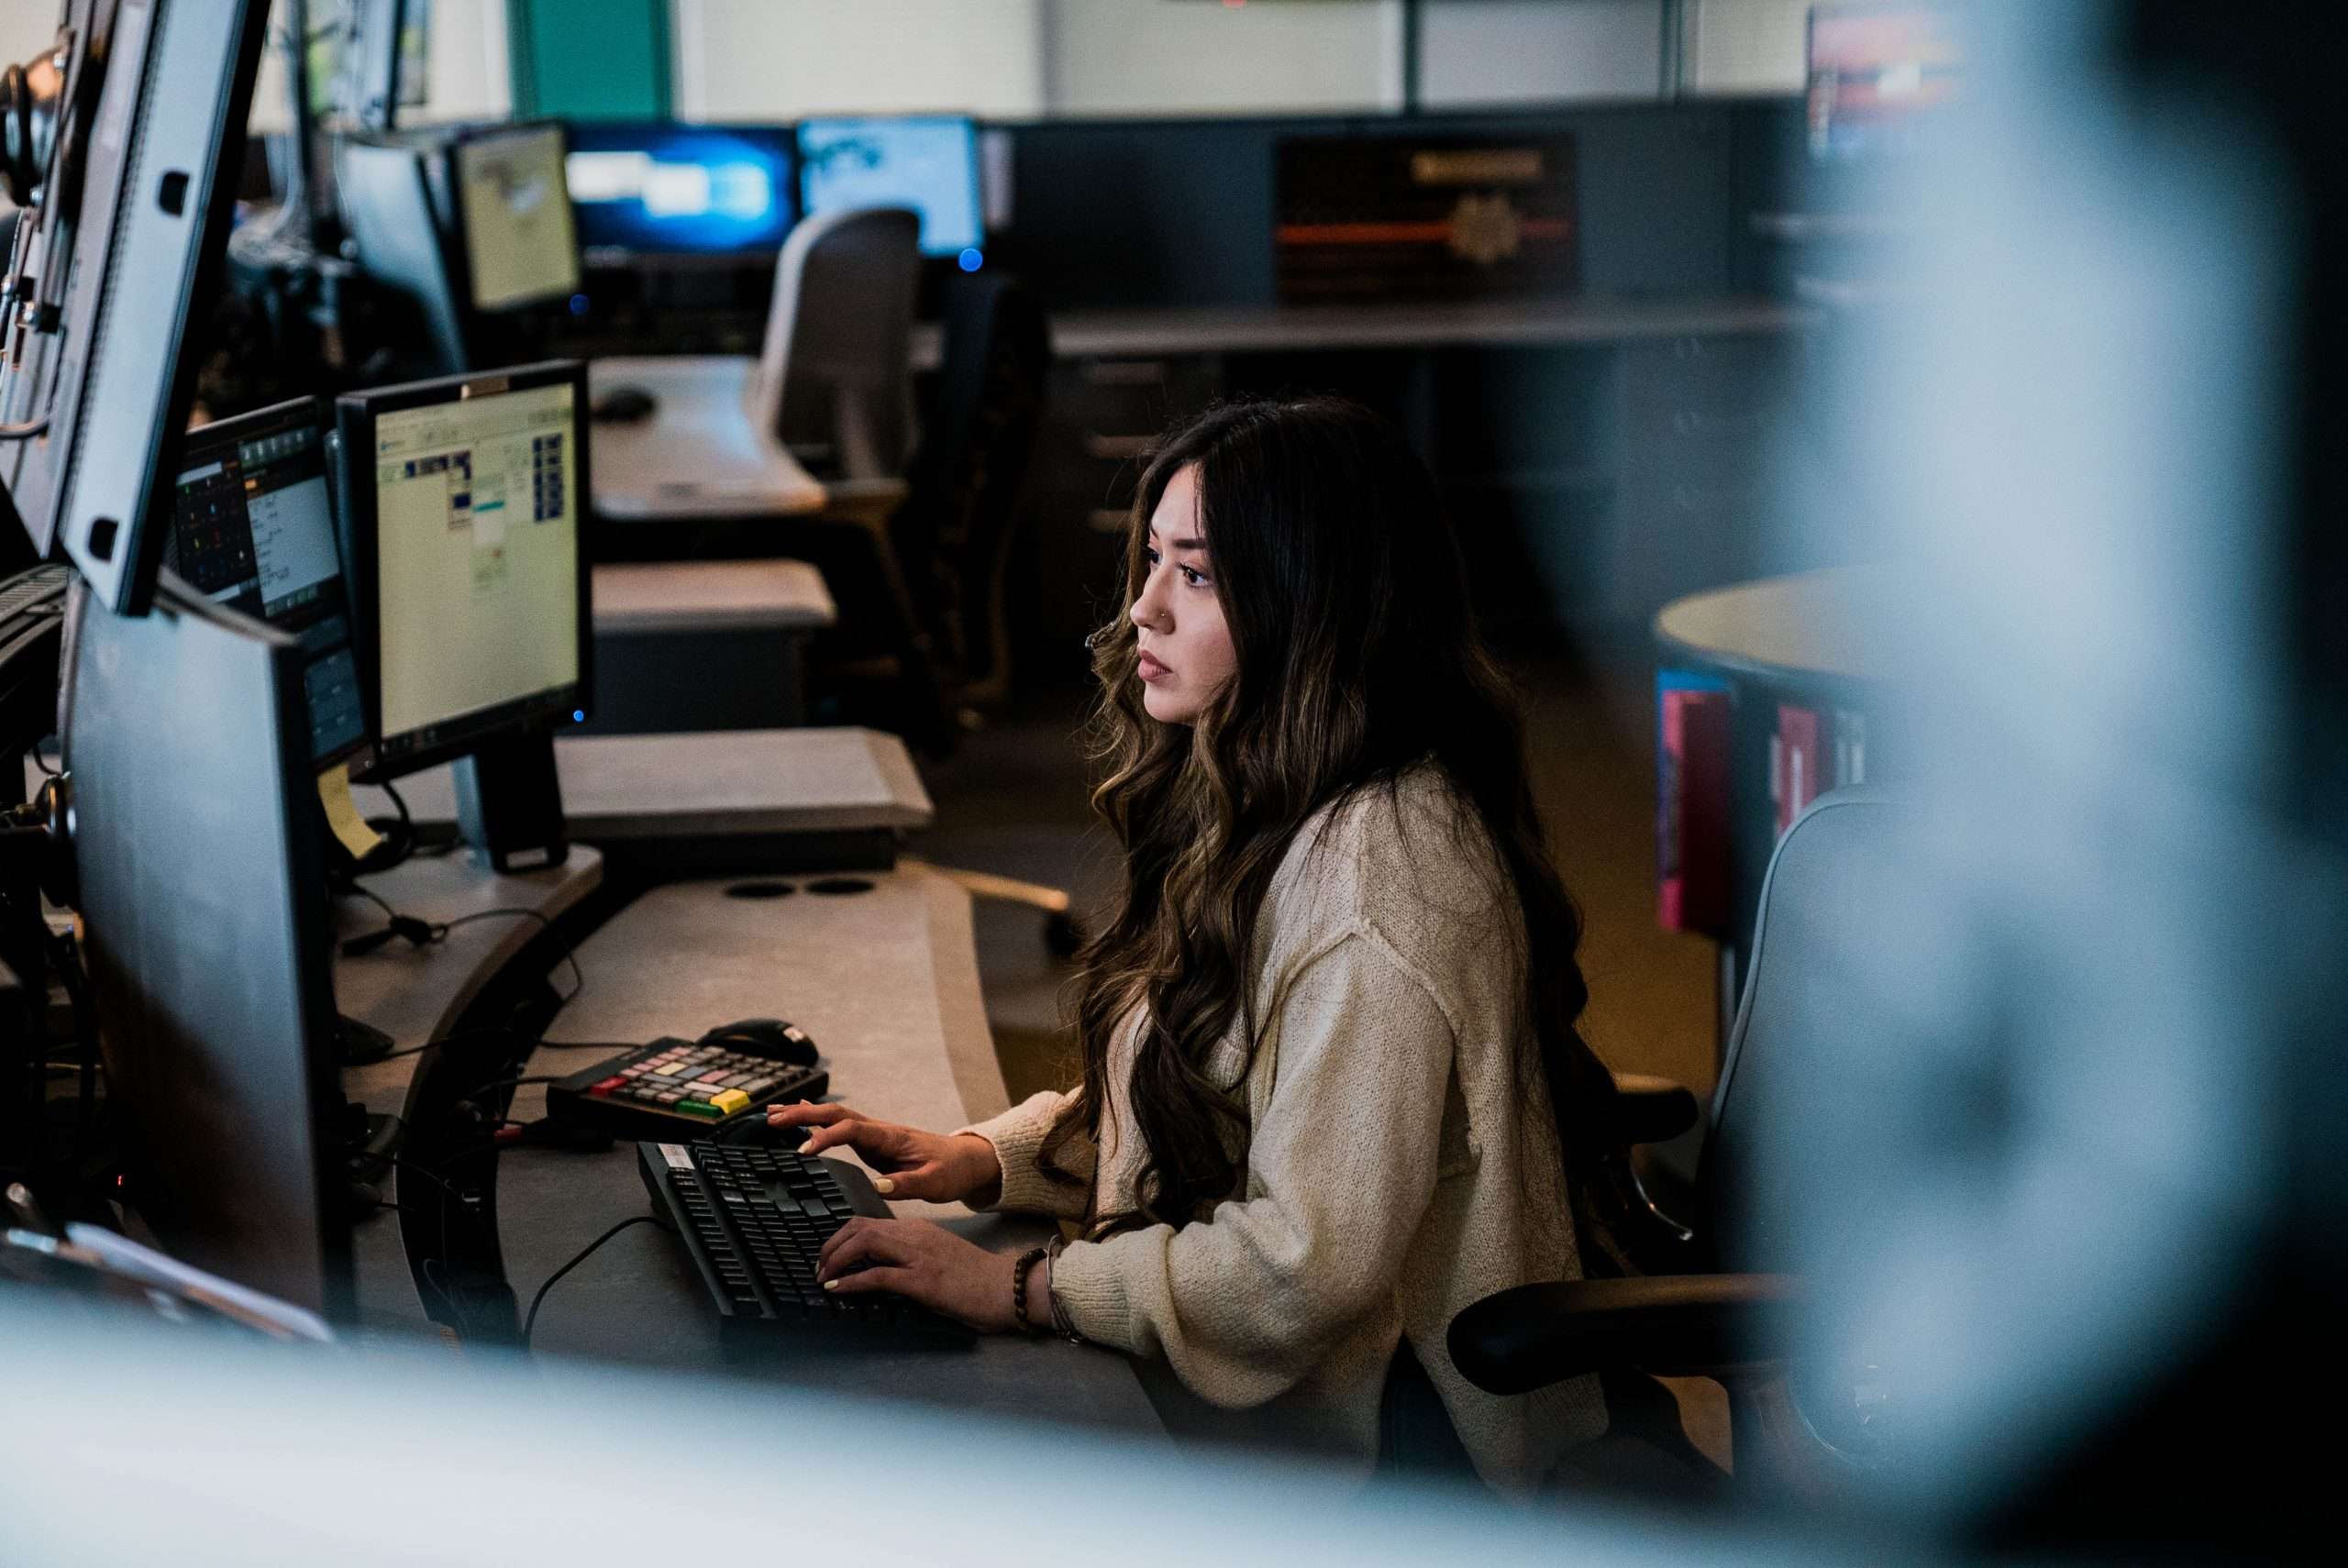 A police dispatcher types on a computer while speaking to a 911 caller